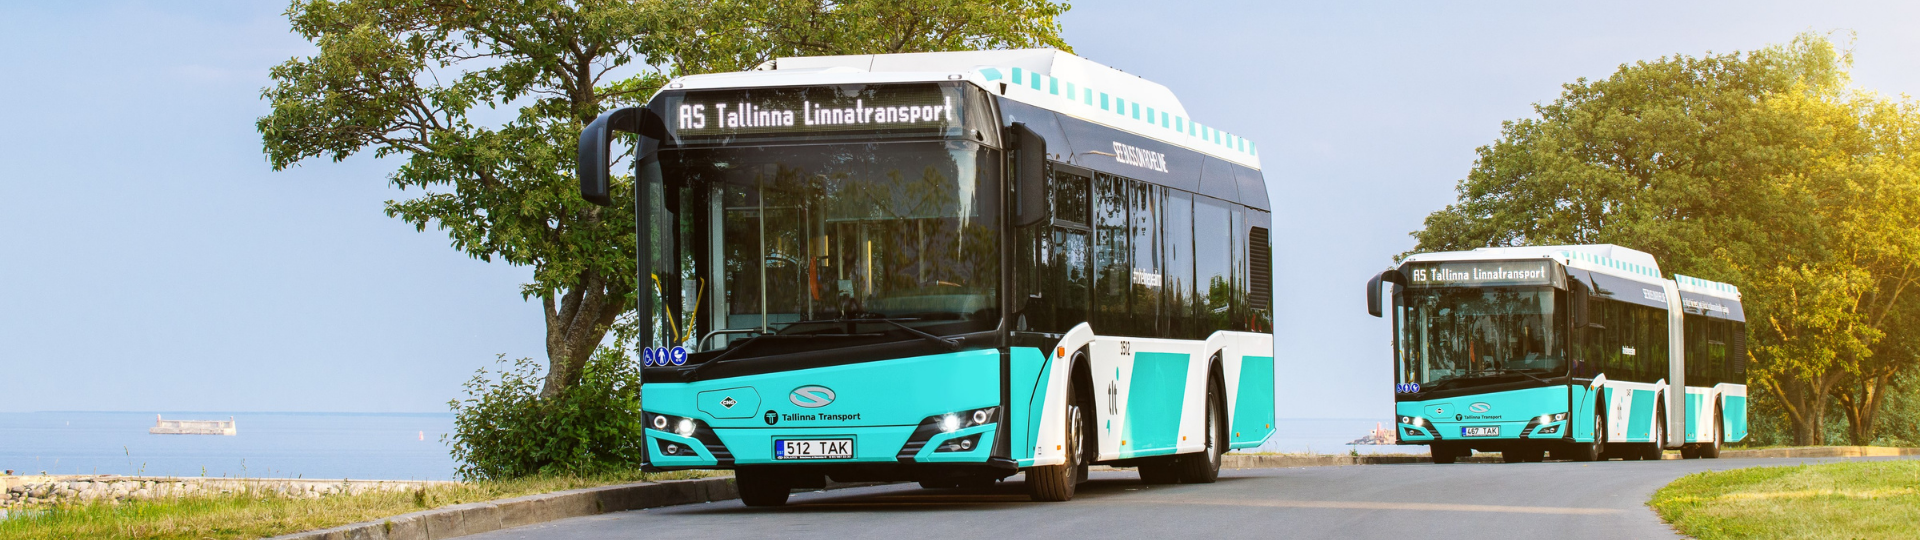 More CNG buses of Solaris to be deployed in Tallinn – up to 150 this time!